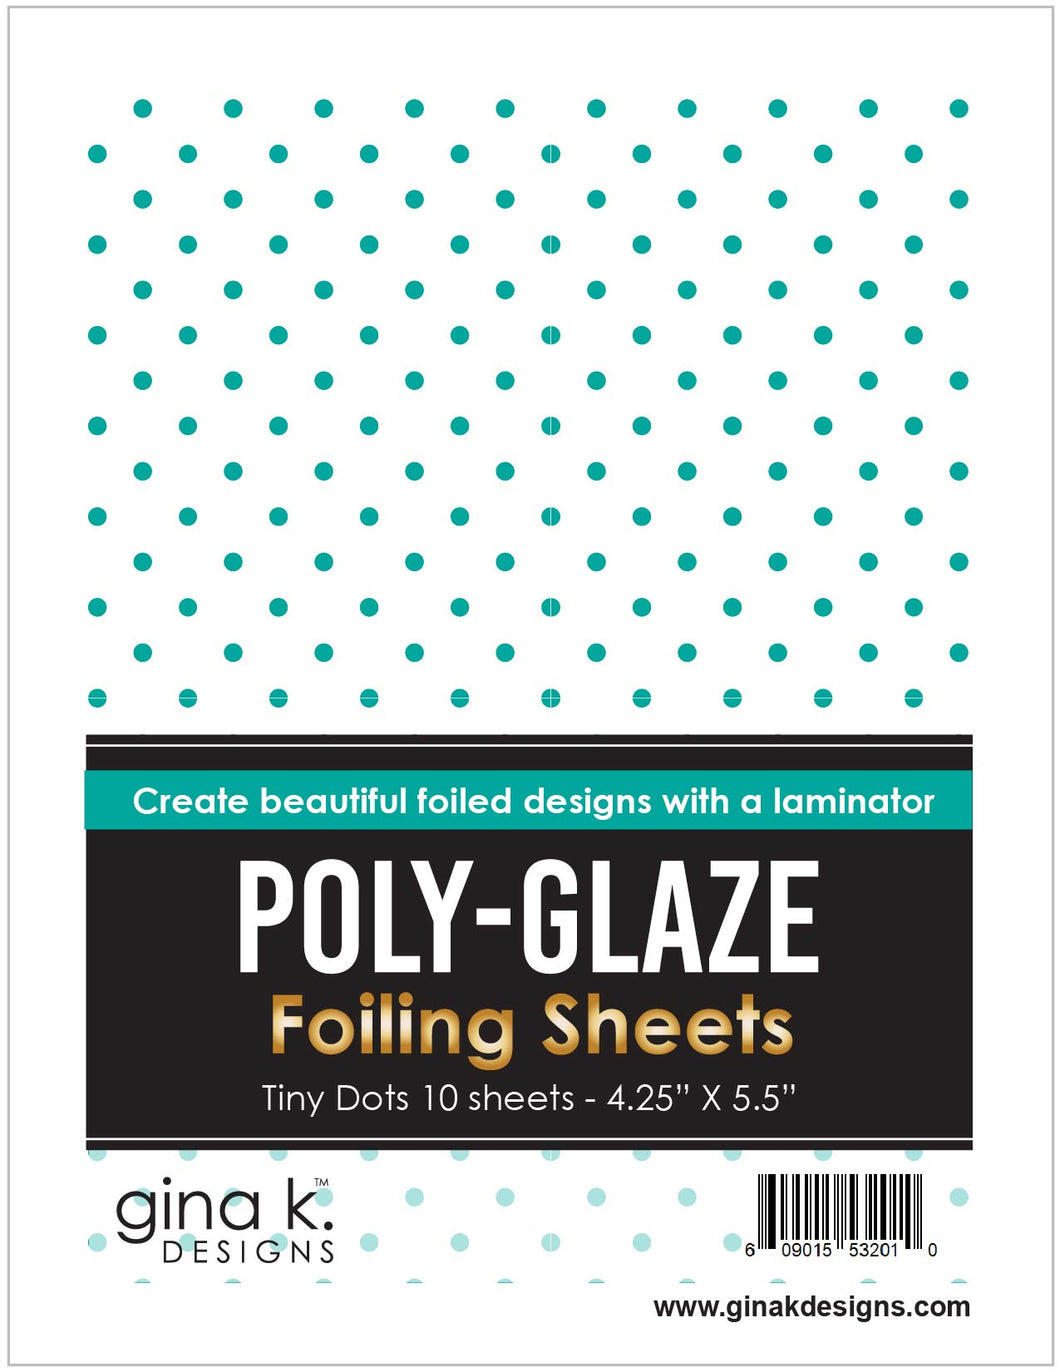 Gina K. Designs - Poly-Glaze Foiling Sheets - Tiny Dots. 10 sheets – 4 1/4” X 5 1/2”. The new Poly-Glaze Foiling Sheets are a fun way to add foil to your paper crafting projects! These sheets are printed with a Poly-Glaze coating that allows you to use Deco-foil without getting black spots or dropouts. Ontario Canada.